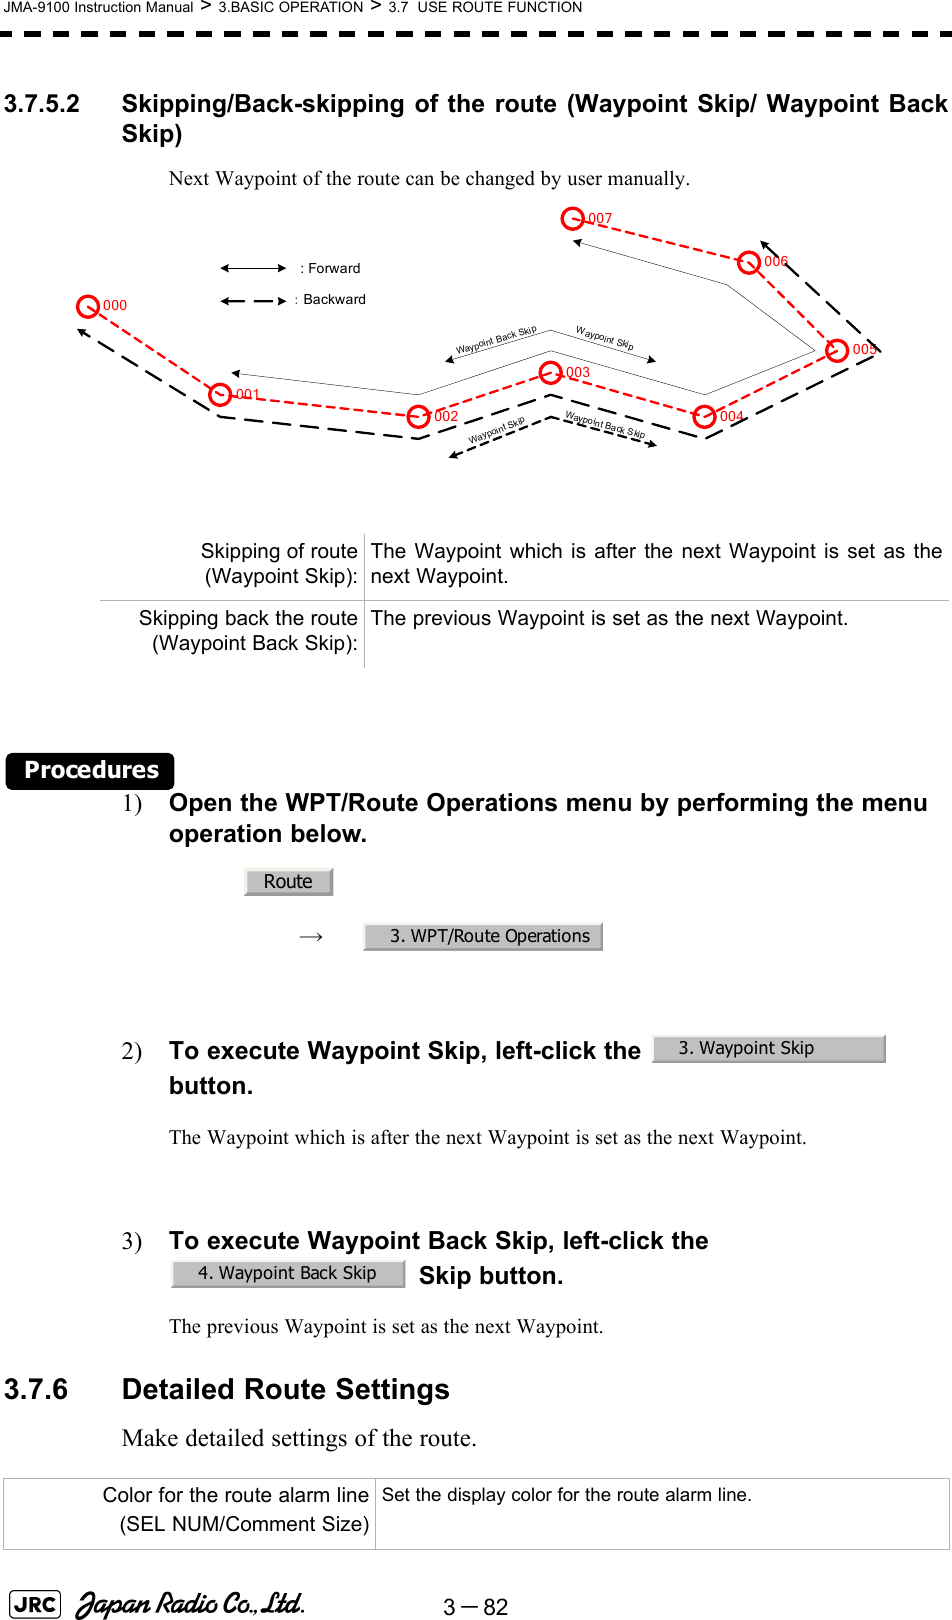 3－82JMA-9100 Instruction Manual &gt; 3.BASIC OPERATION &gt; 3.7  USE ROUTE FUNCTION3.7.5.2 Skipping/Back-skipping of the route (Waypoint Skip/ Waypoint BackSkip)Next Waypoint of the route can be changed by user manually.Procedures1) Open the WPT/Route Operations menu by performing the menu operation below.→　2) To execute Waypoint Skip, left-click the    button.The Waypoint which is after the next Waypoint is set as the next Waypoint.3) To execute Waypoint Back Skip, left-click the  Skip button.The previous Waypoint is set as the next Waypoint.3.7.6 Detailed Route SettingsMake detailed settings of the route.Skipping of route(Waypoint Skip):The Waypoint which is after the next Waypoint is set as thenext Waypoint.Skipping back the route(Waypoint Back Skip):The previous Waypoint is set as the next Waypoint.Color for the route alarm line(SEL NUM/Comment Size)Set the display color for the route alarm line.001002003004005006007000 : Forward：BackwardWaypoint SkipWaypoint Back SkipWaypoint SkipWaypoint Back SkipRoute3. WPT/Route Operations3. Waypoint Skip4. Waypoint Back Skip